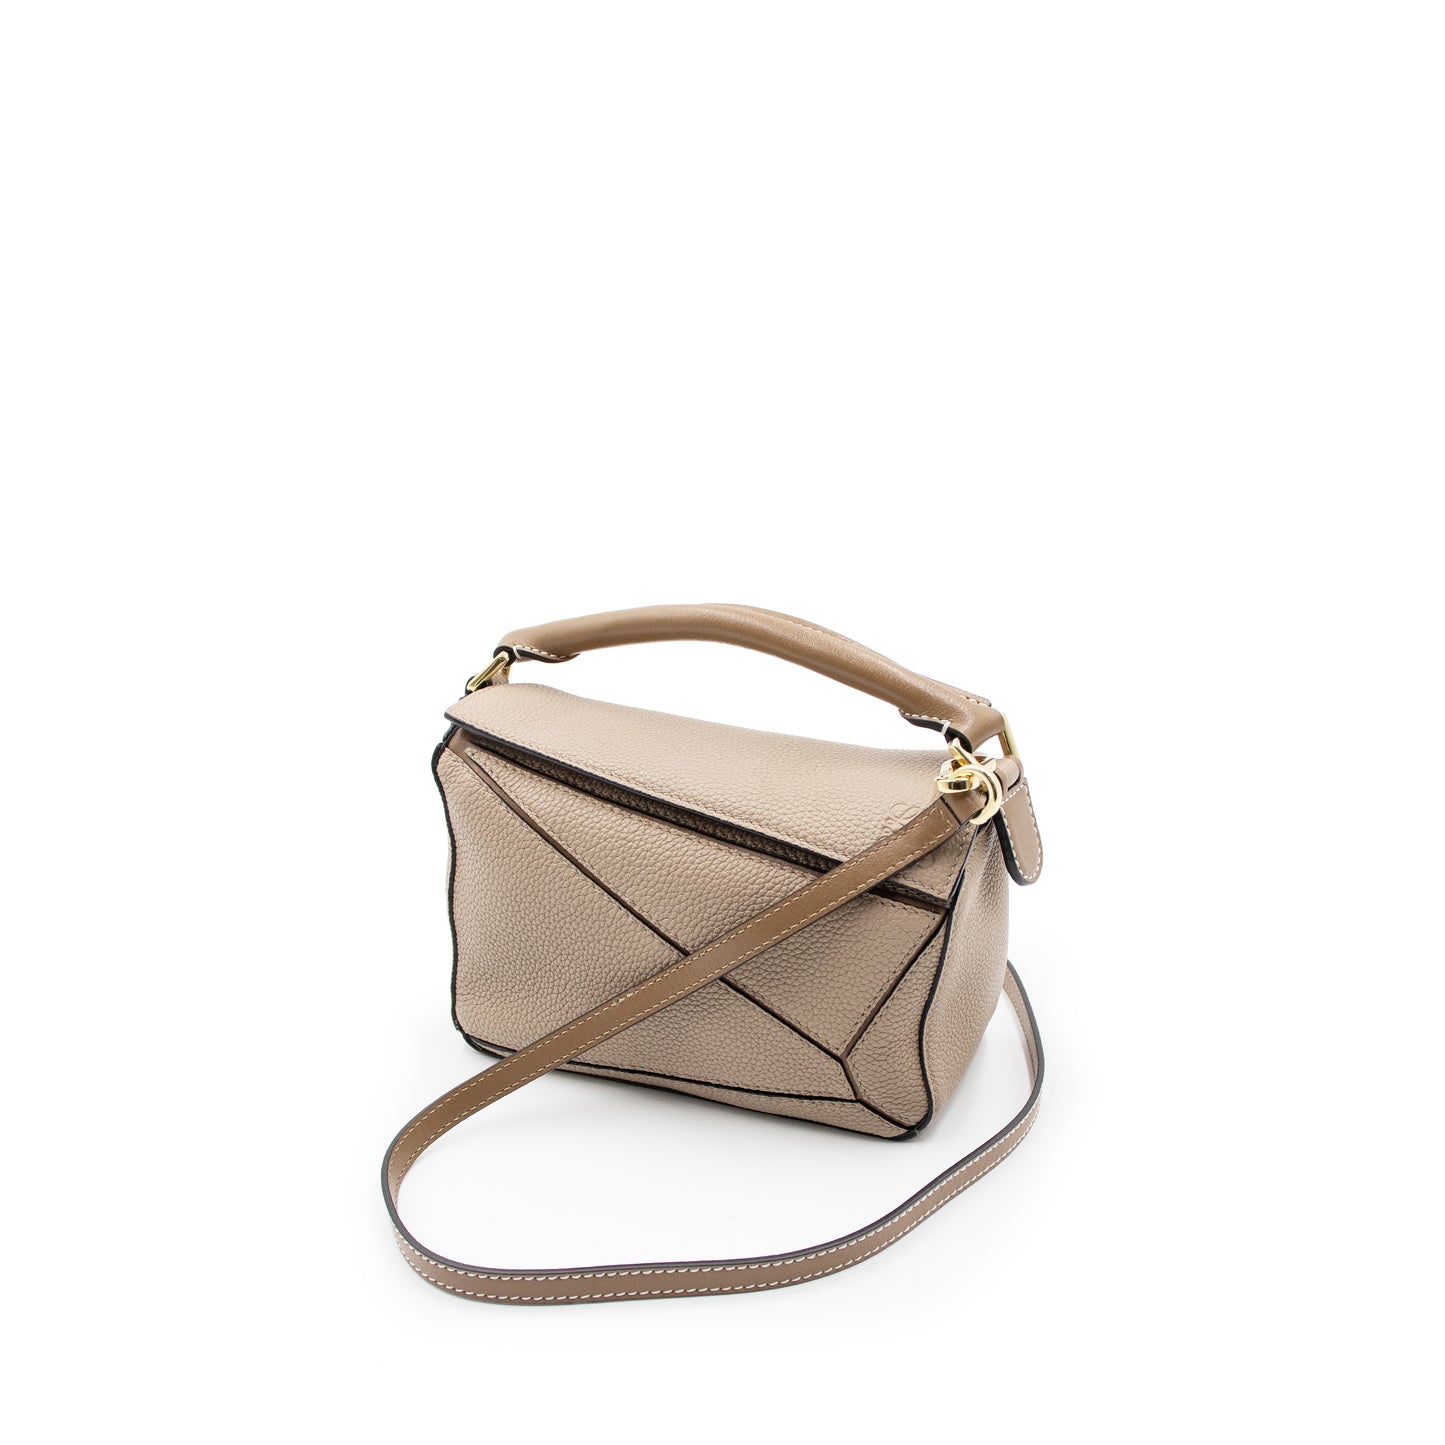 Mini Puzzle Bag in Soft Grained Calfskin in Sand/Mink